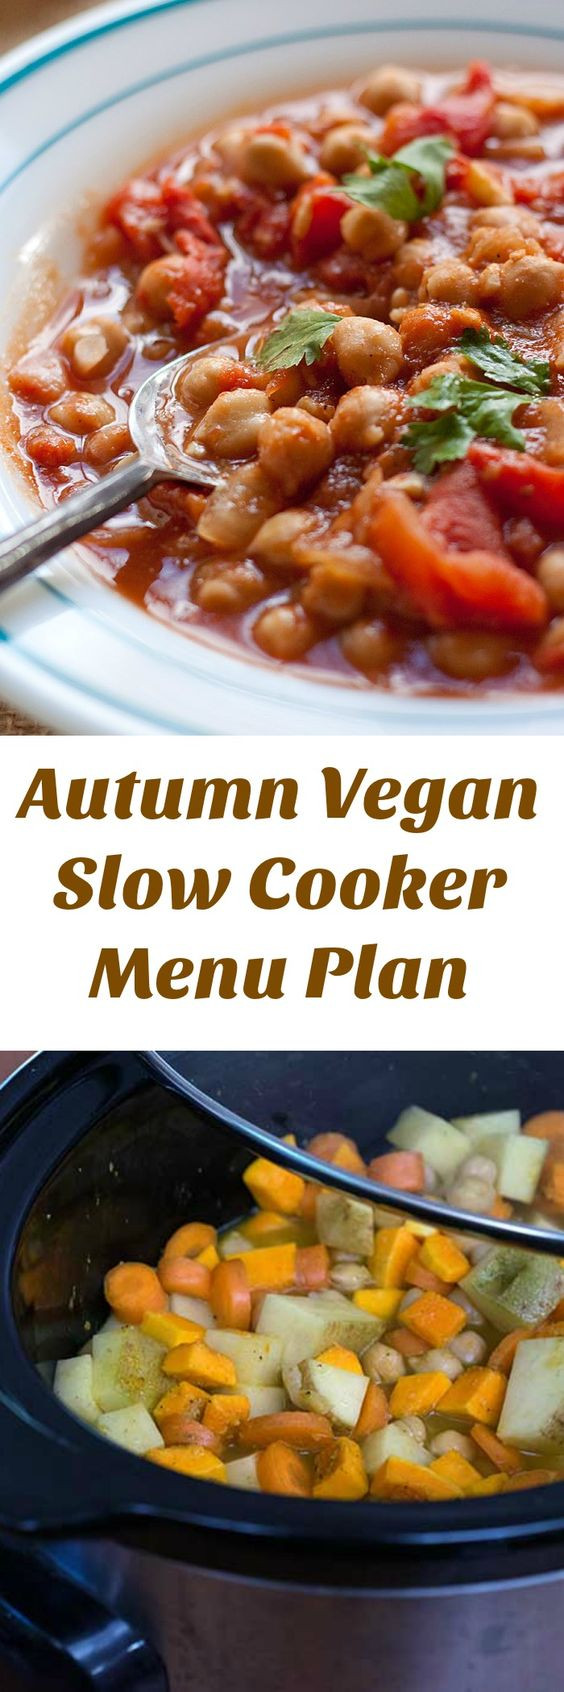 Fall Main Dishes
 A Vegan Slow Cooker Menu Plan That Makes Autumn Easy